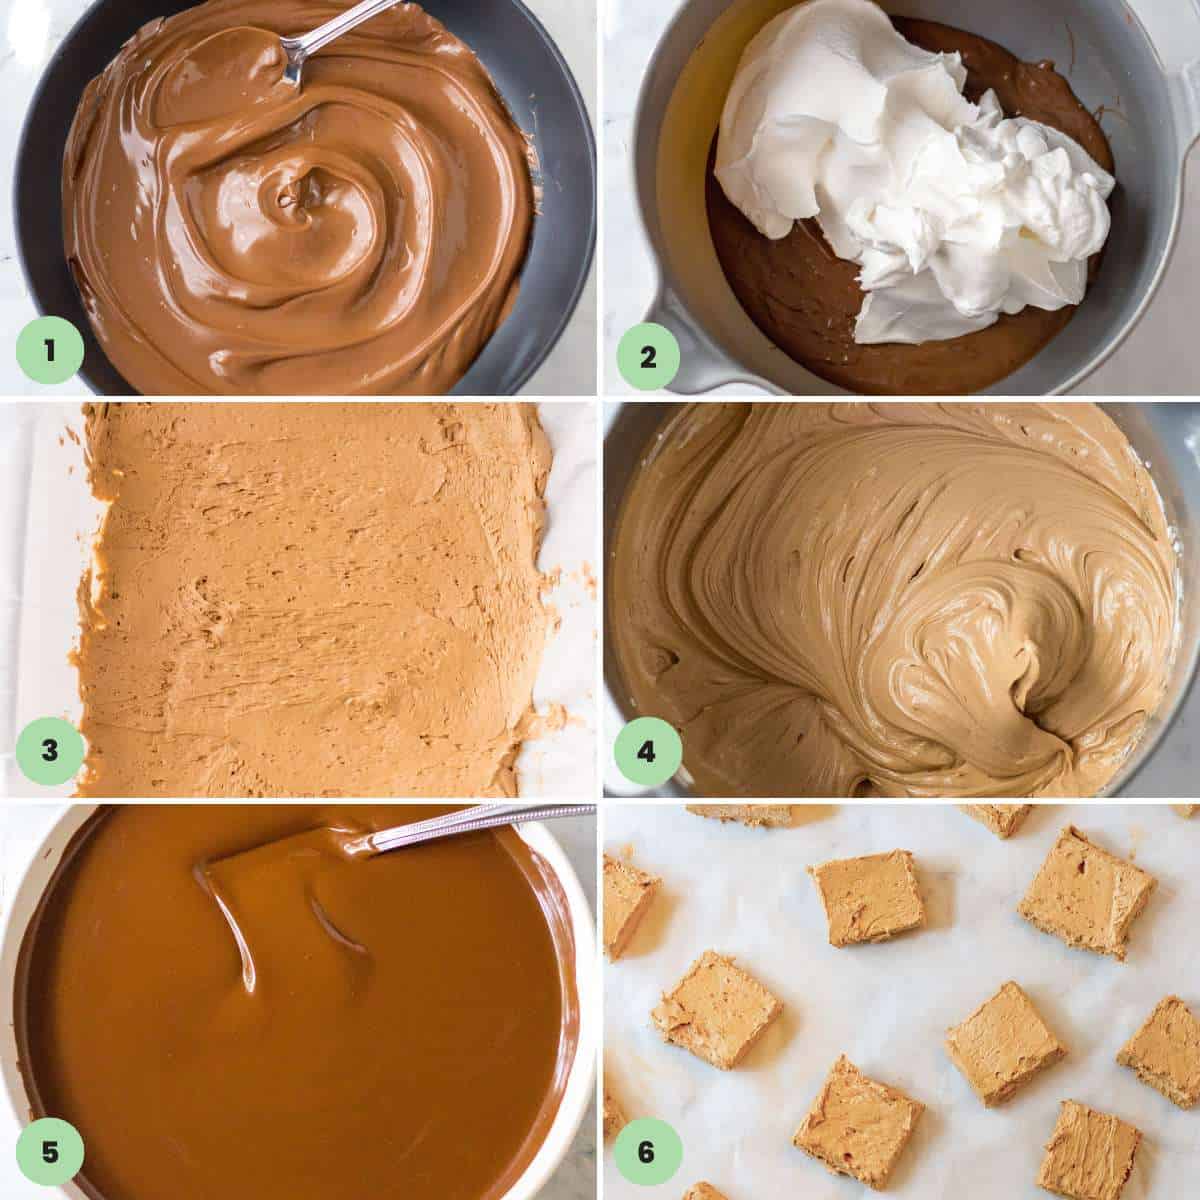 Steps showing how to make the Three Musketeers Candy.